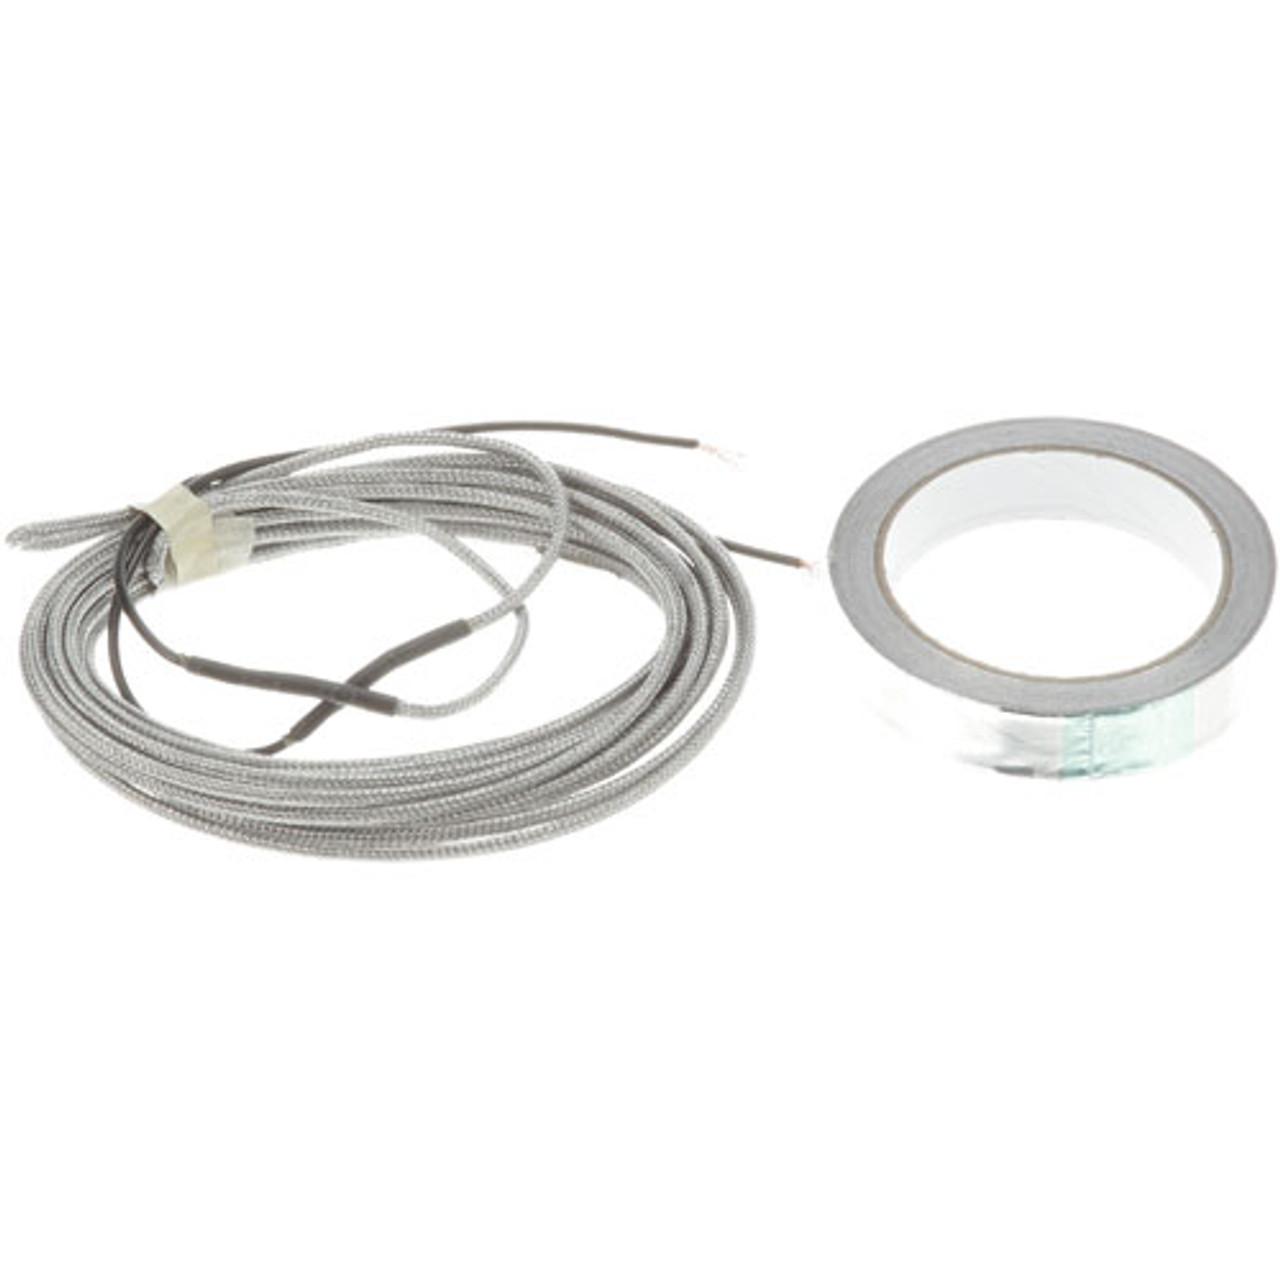 Heater Wire Service Kit , 20 Ft. - Replacement Part For Kolpak 500000174